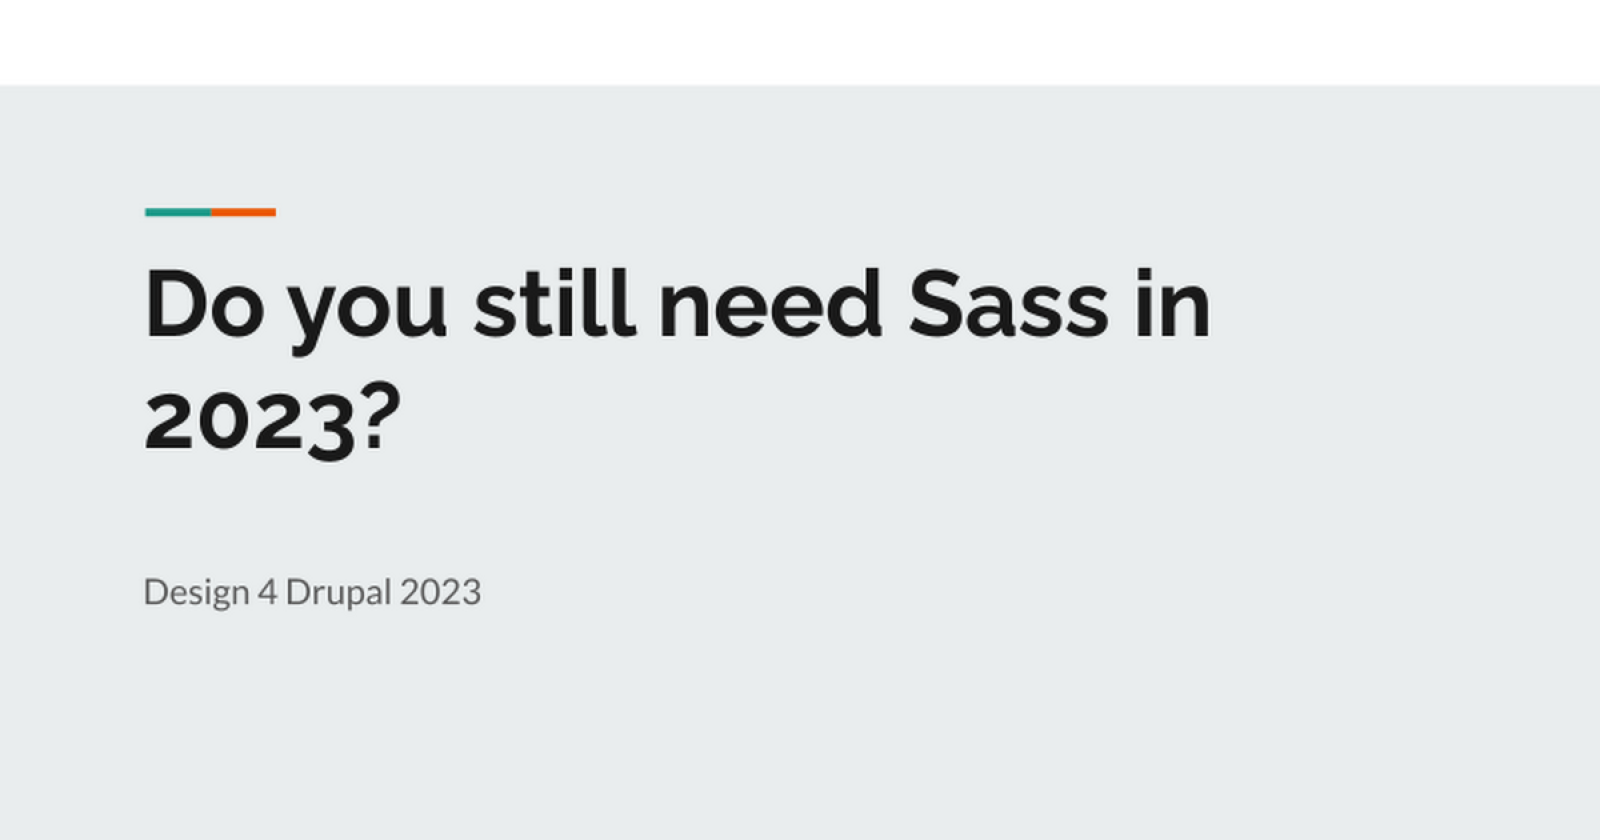 Do you still need Sass in 2023?